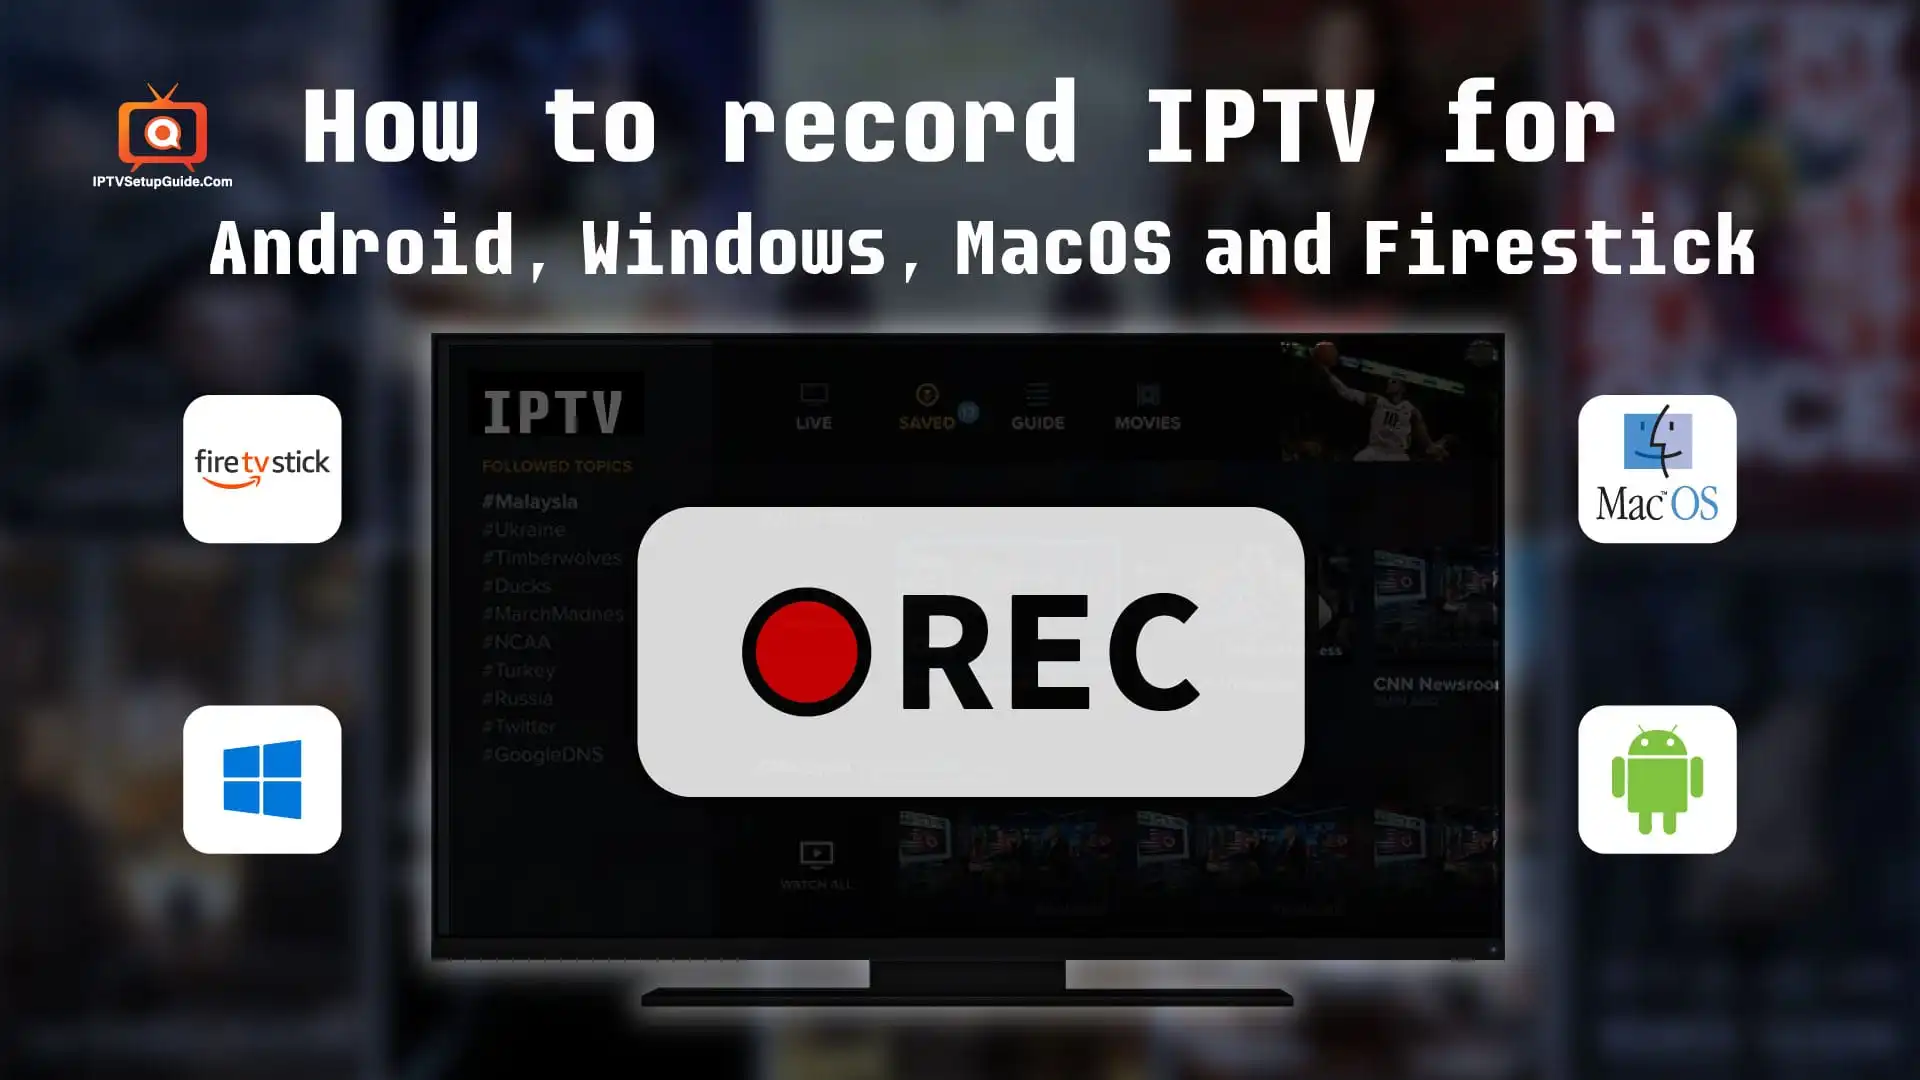 Record IPTV for Android, Windows, MacOS and Firestick